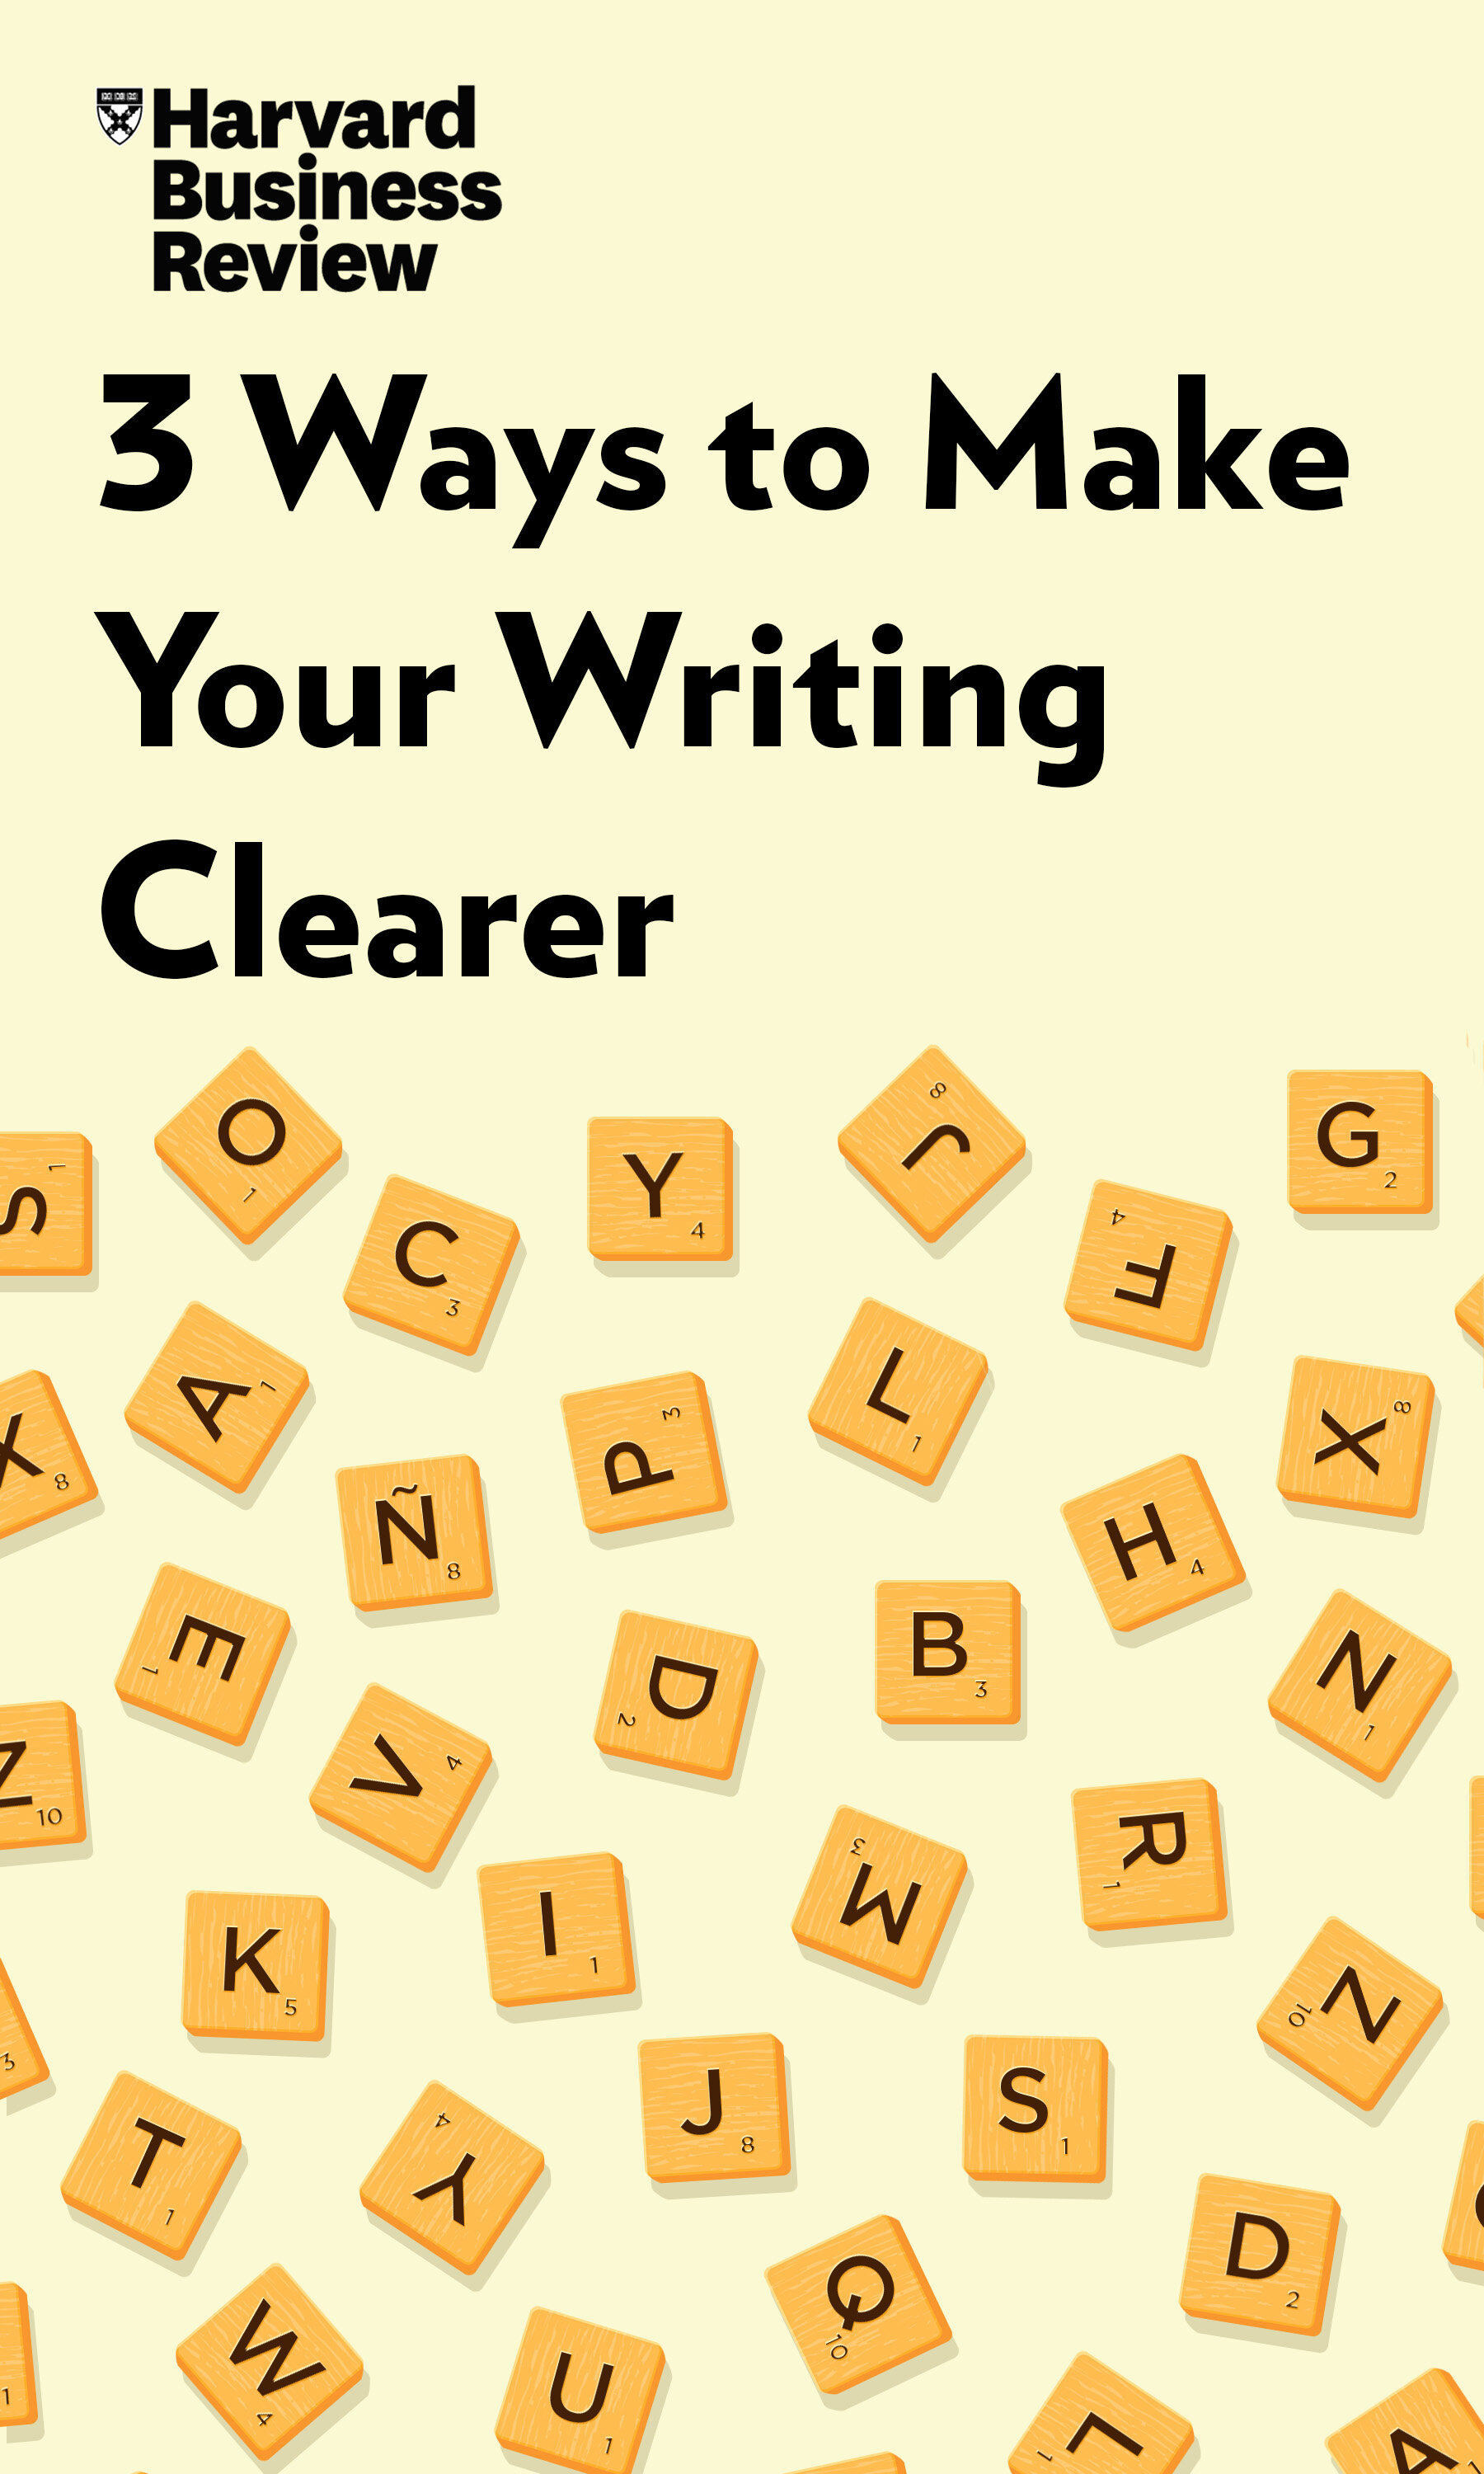 3-Ways-to-Make-Your-Writing-Clearer-eBook.jpg